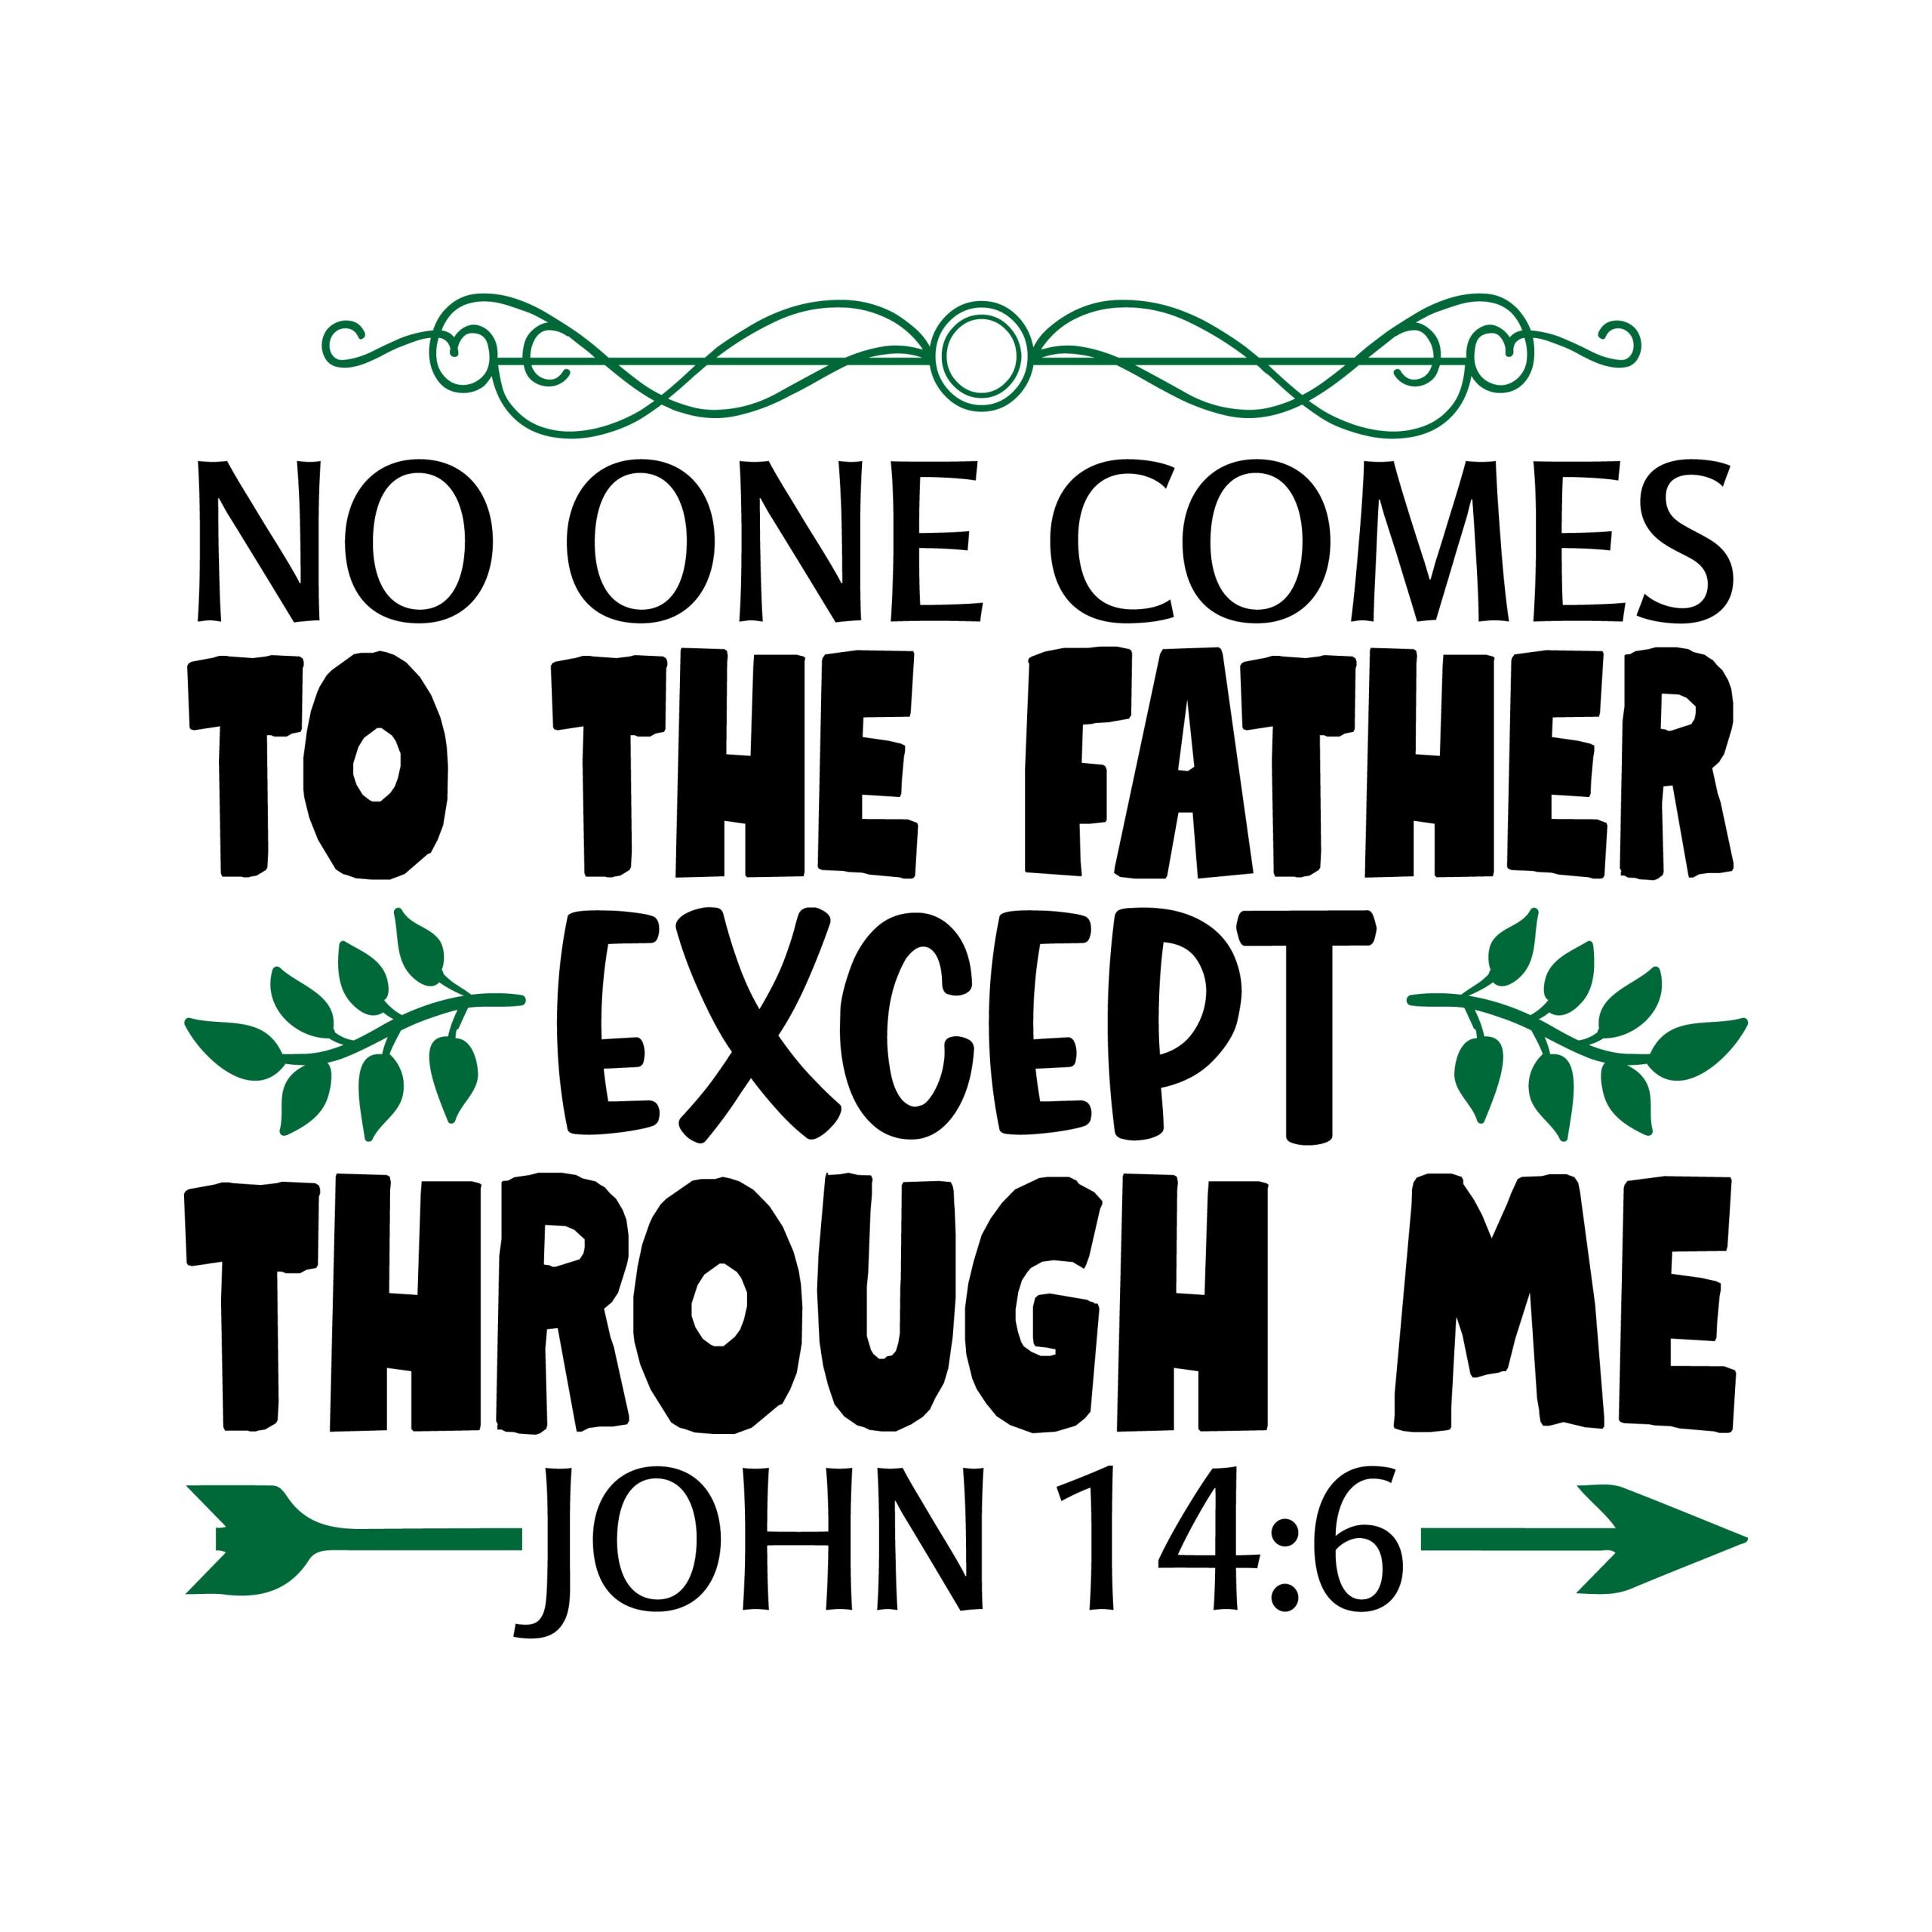 No one comes to the father except through me John 14:6, bible verses, scripture verses, svg files, passages, sayings, cricut designs, silhouette, embroidery, bundle, free cut files, design space, vector